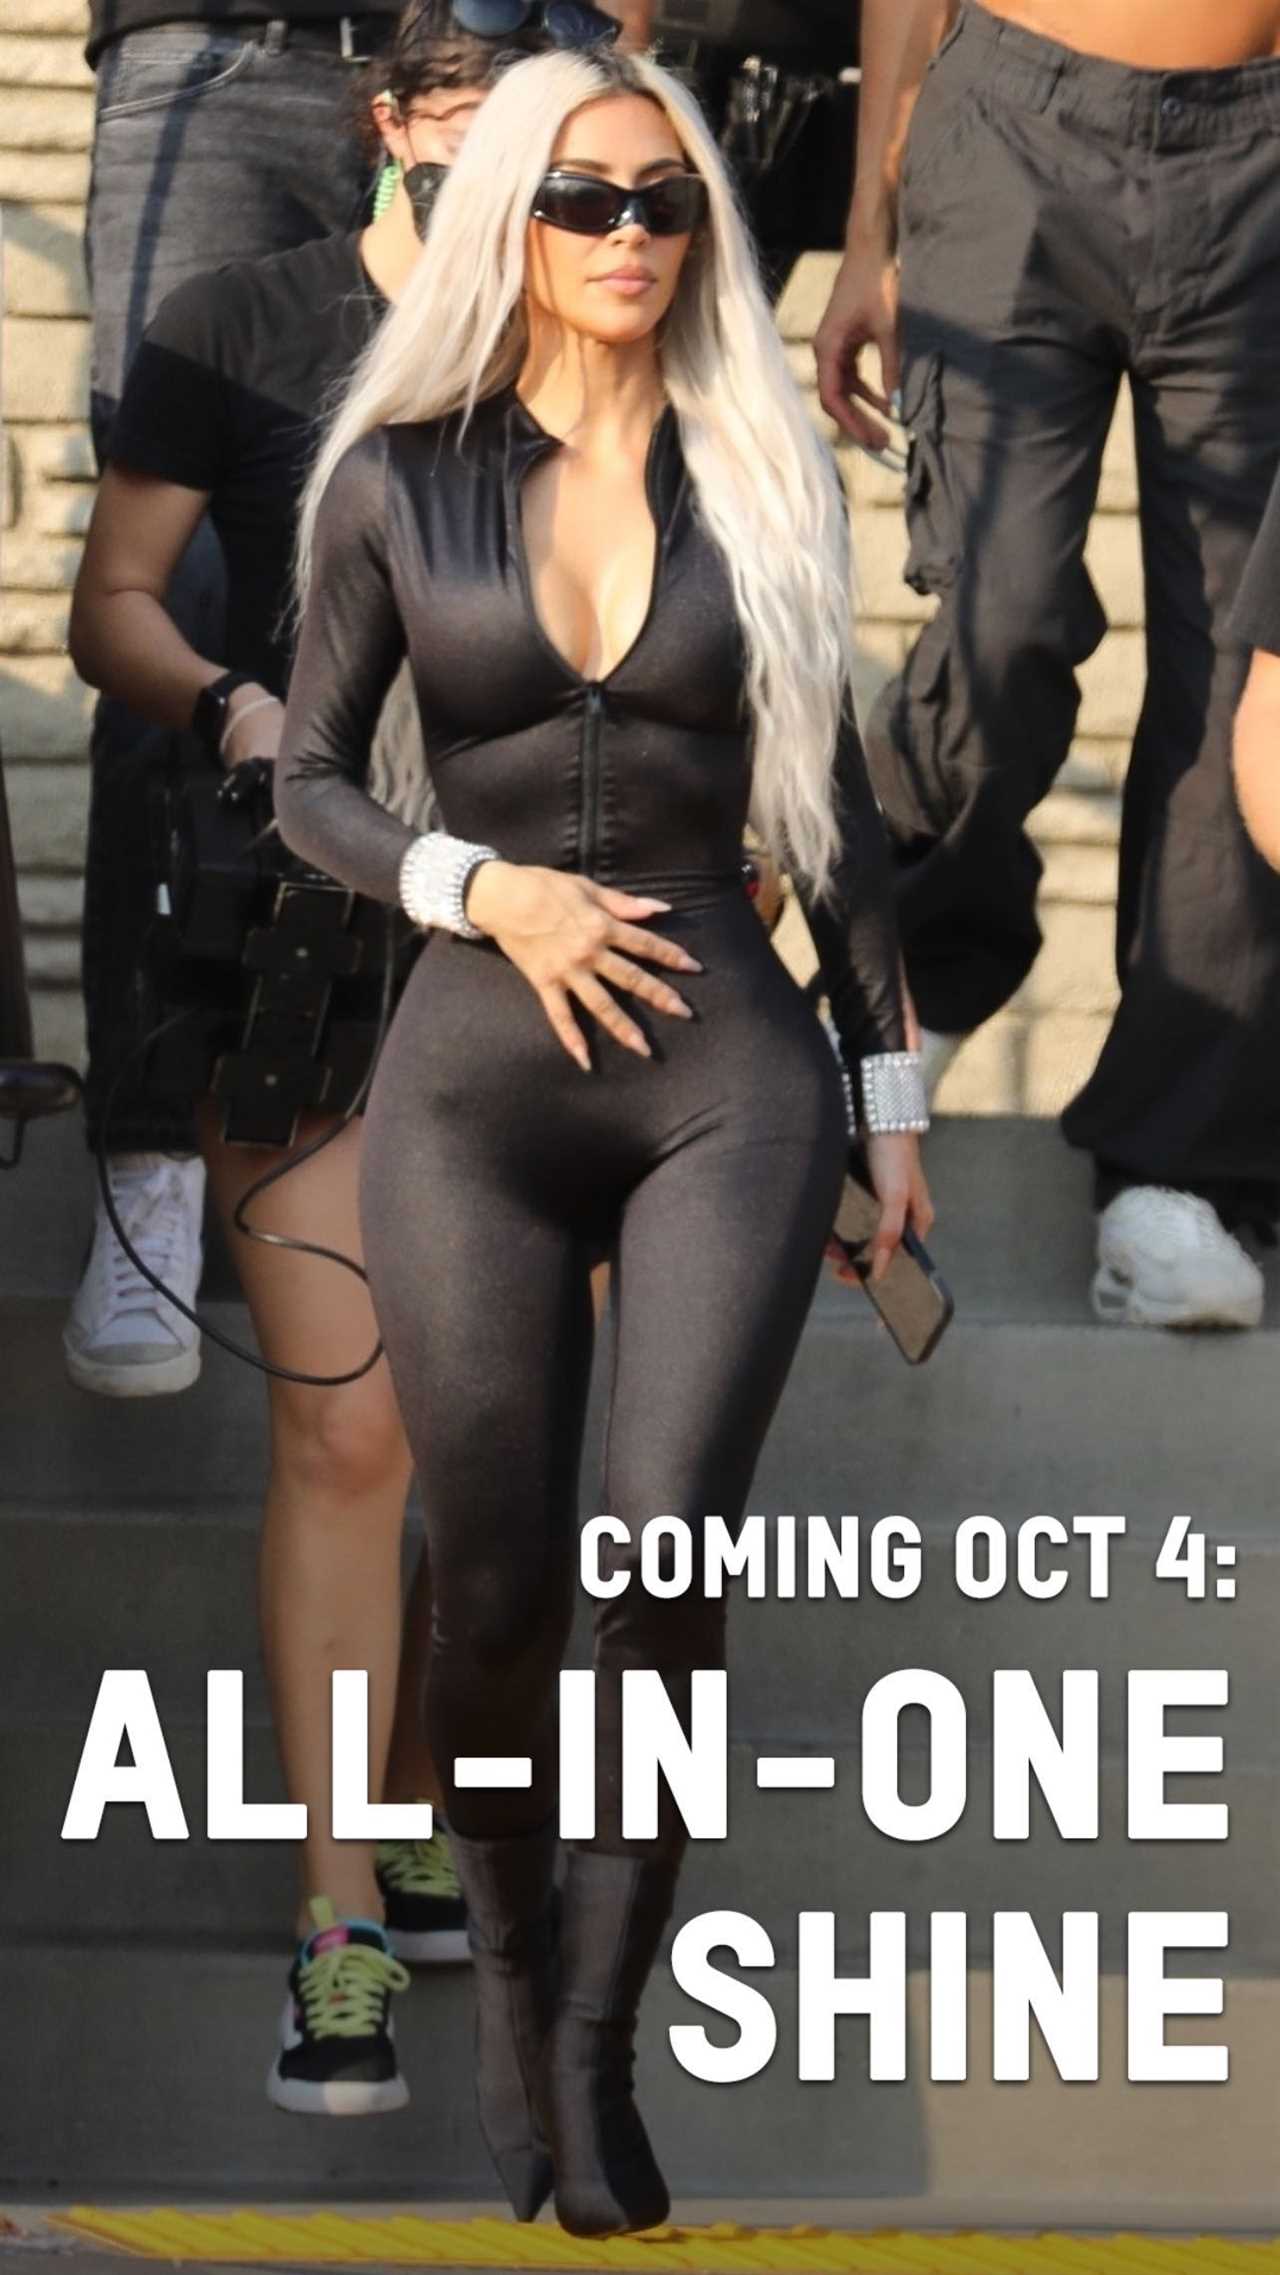 Kim Kardashian shows off her tiny waist and legs in skintight metallic catsuit for new SKIMS ad